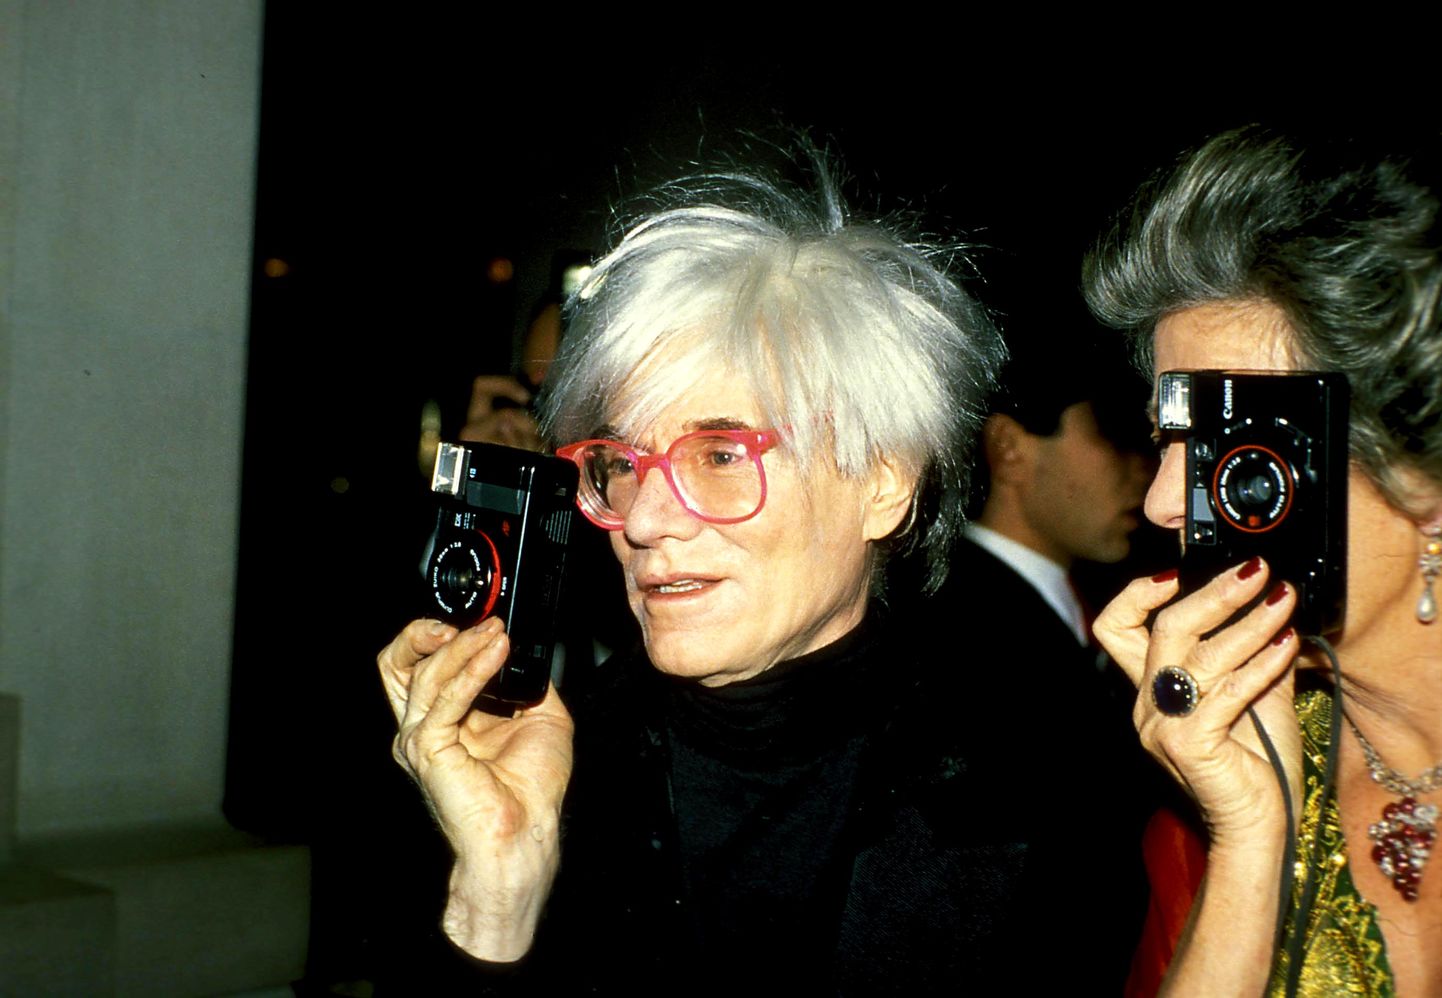 Andy Warhol. Credit: 2702532GLB/MPI/Capital Pictures
CAP/MPI/GP
©GP/MPI/Capital Pictures